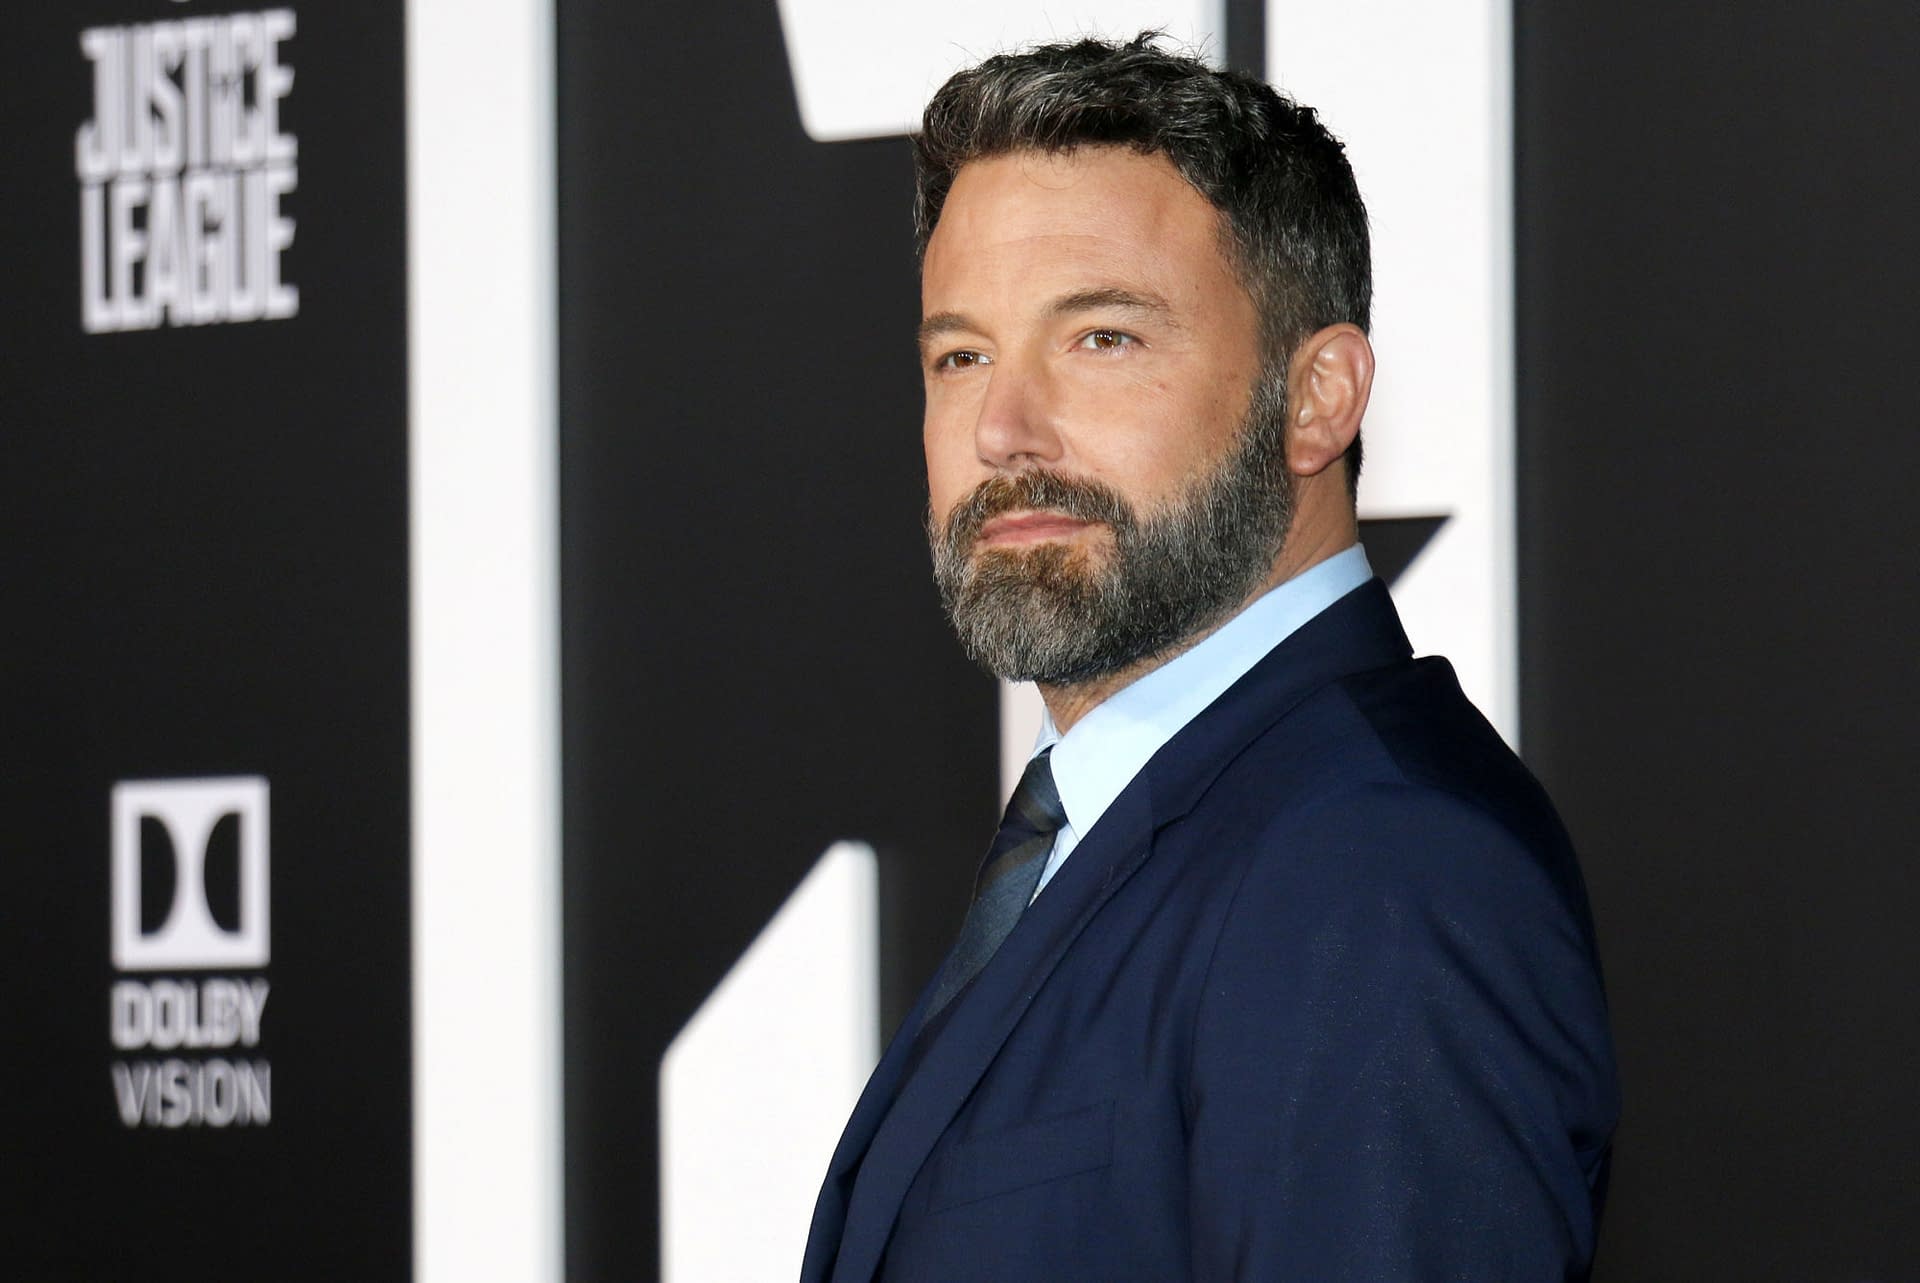 Ben Affleck Says He "Lost His Enthusiasm" After "Justice League"